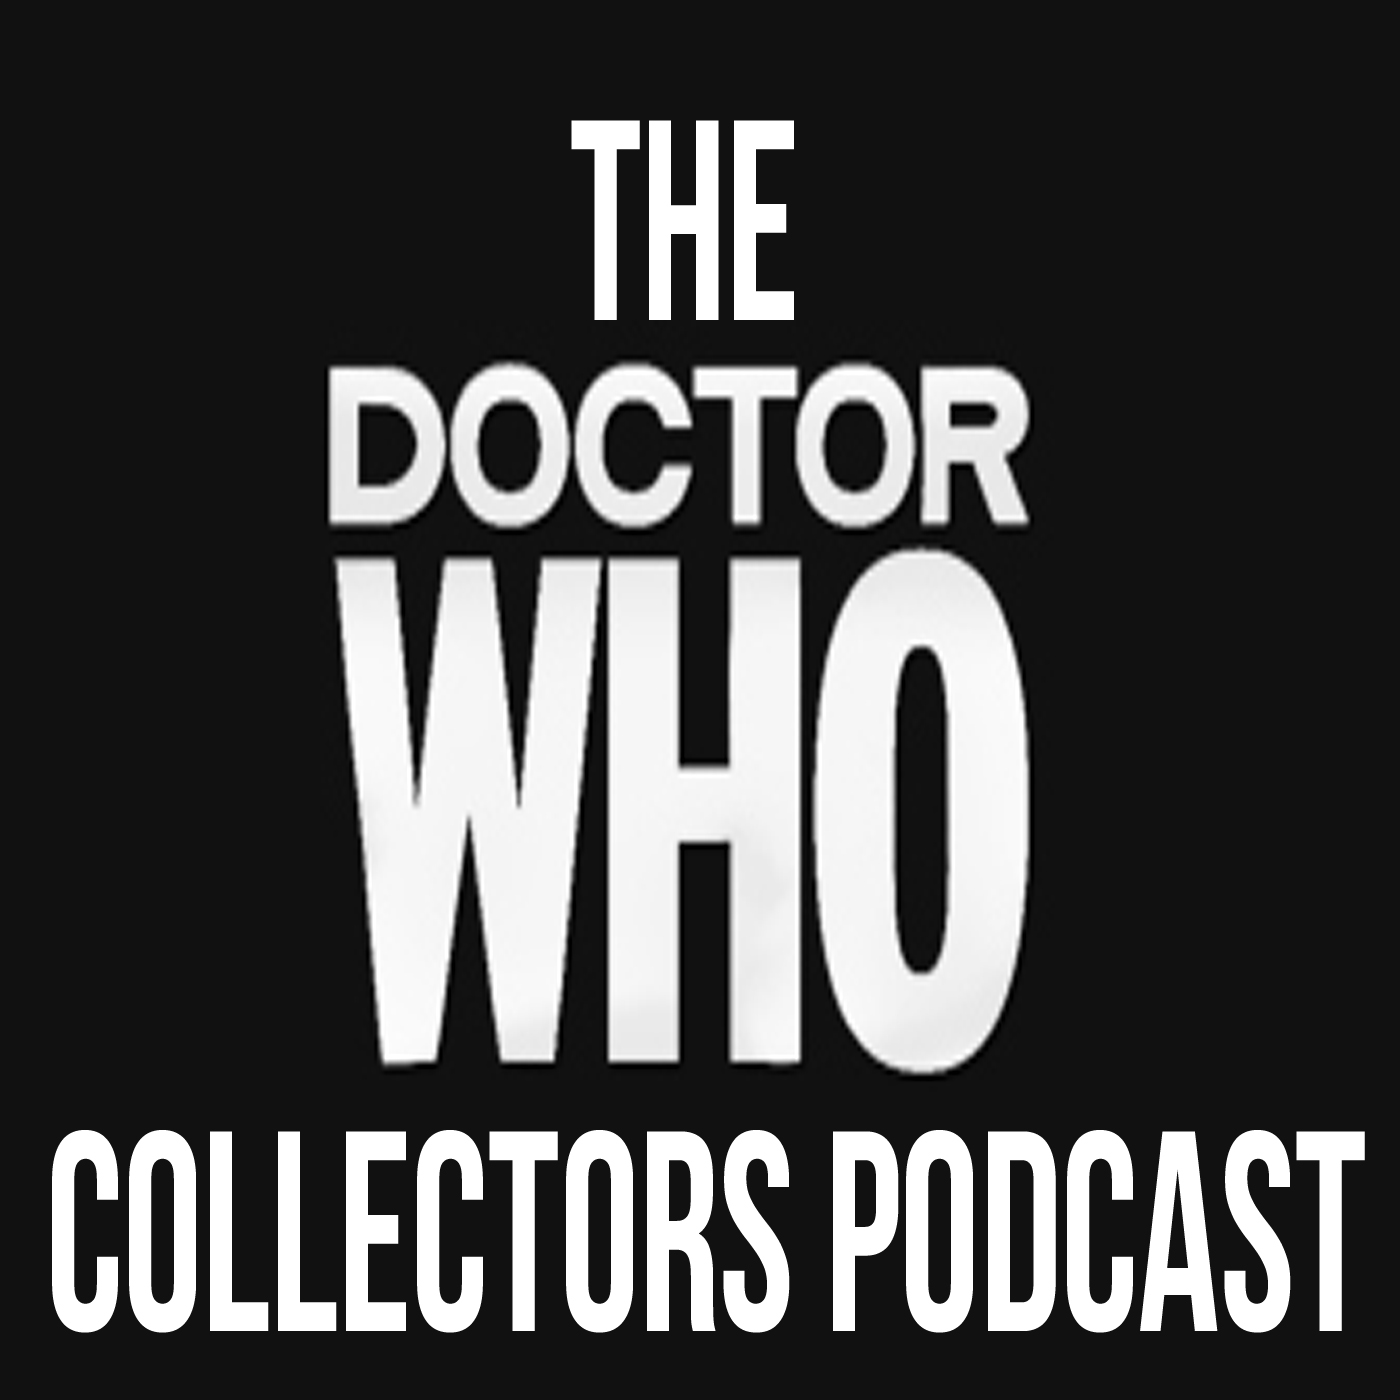 Thumbnail for Episode 61: Dr. Who and the Daleks: A New Book! with John Walsh